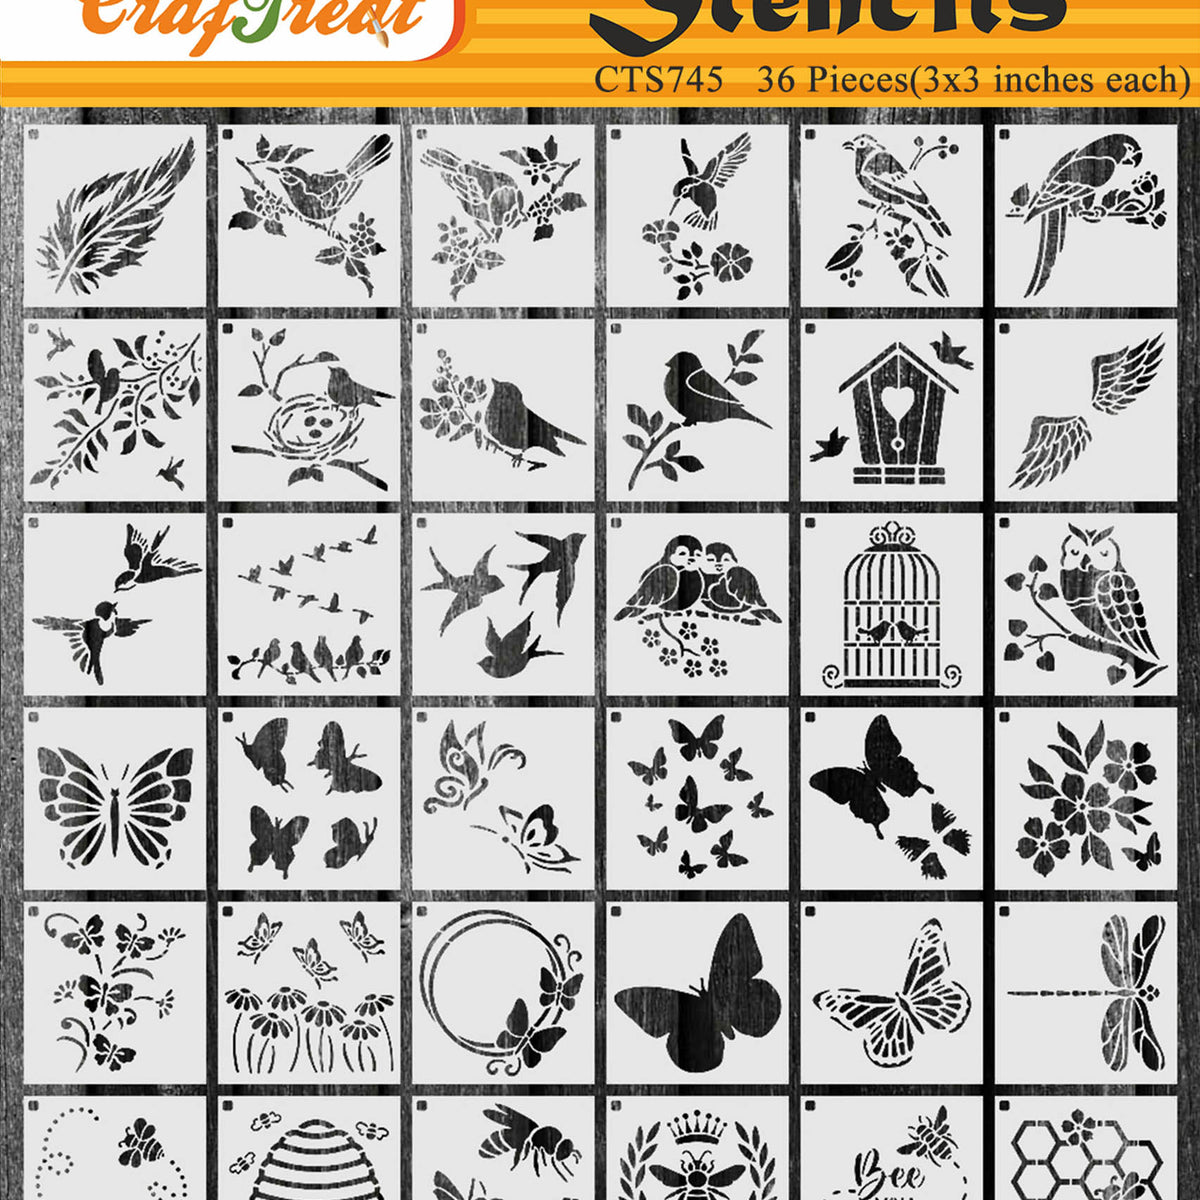 OIAGLH 20 Sheets Flower Stencils Esay To Bend Foldable Bees Leaves